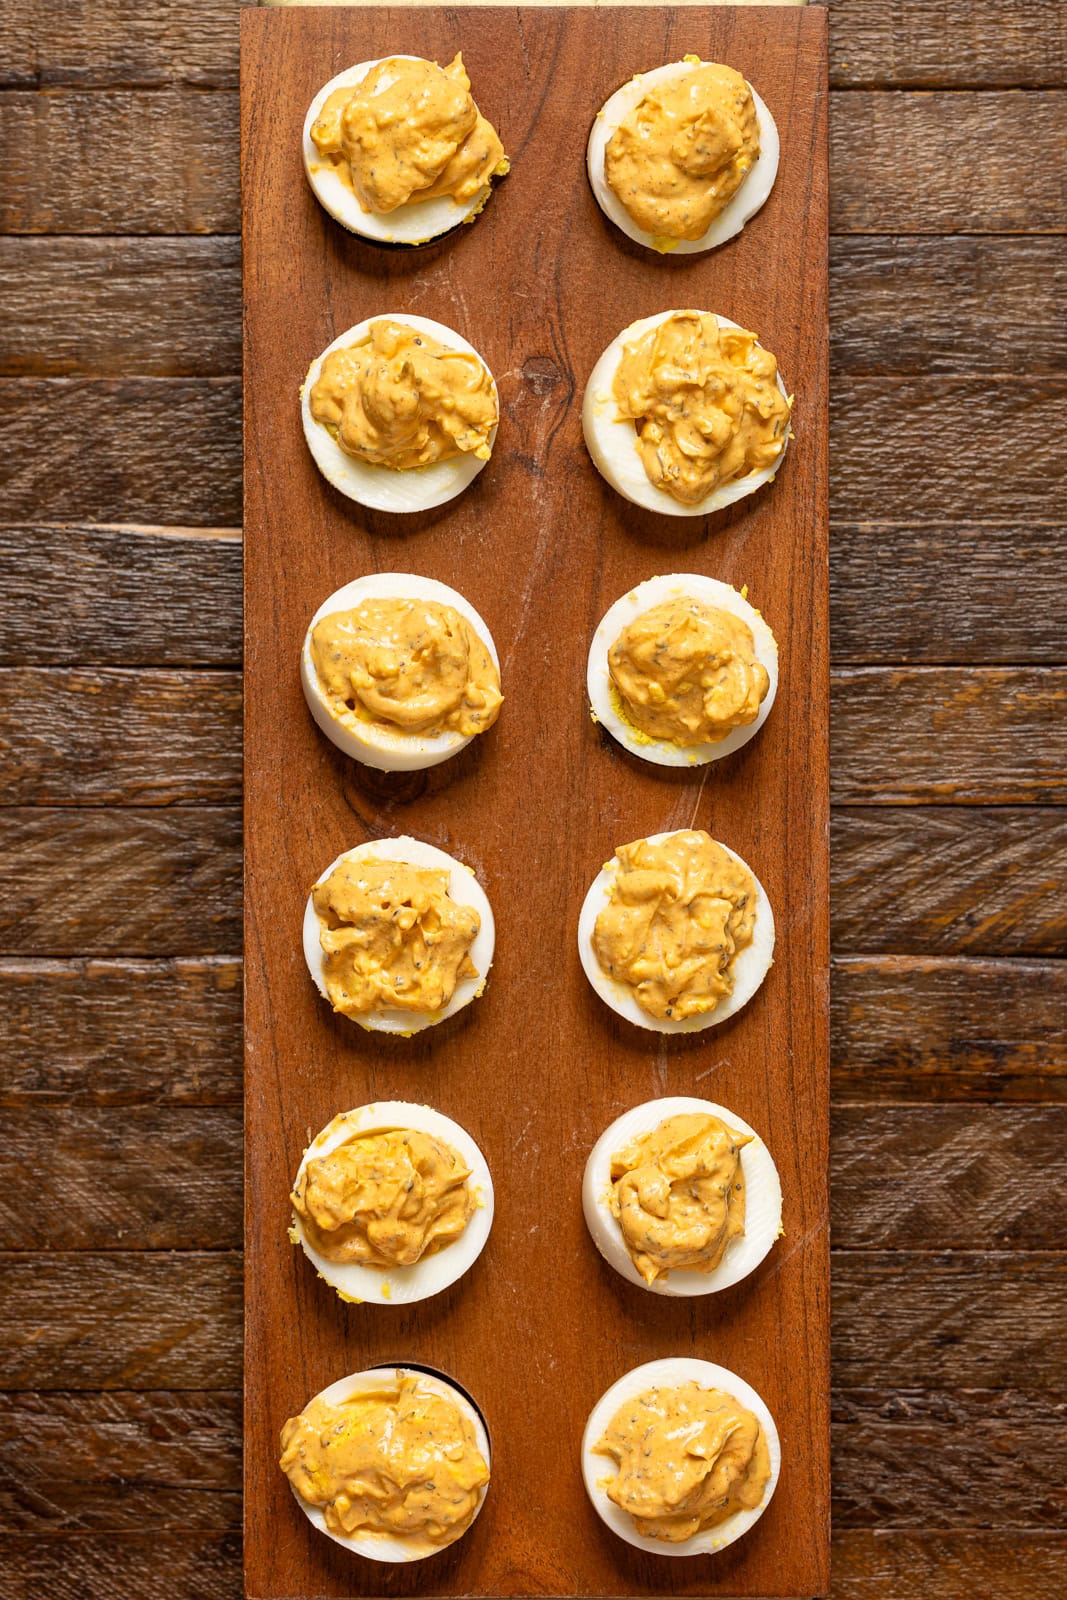 All deviled eggs are lined on a wooden tray.